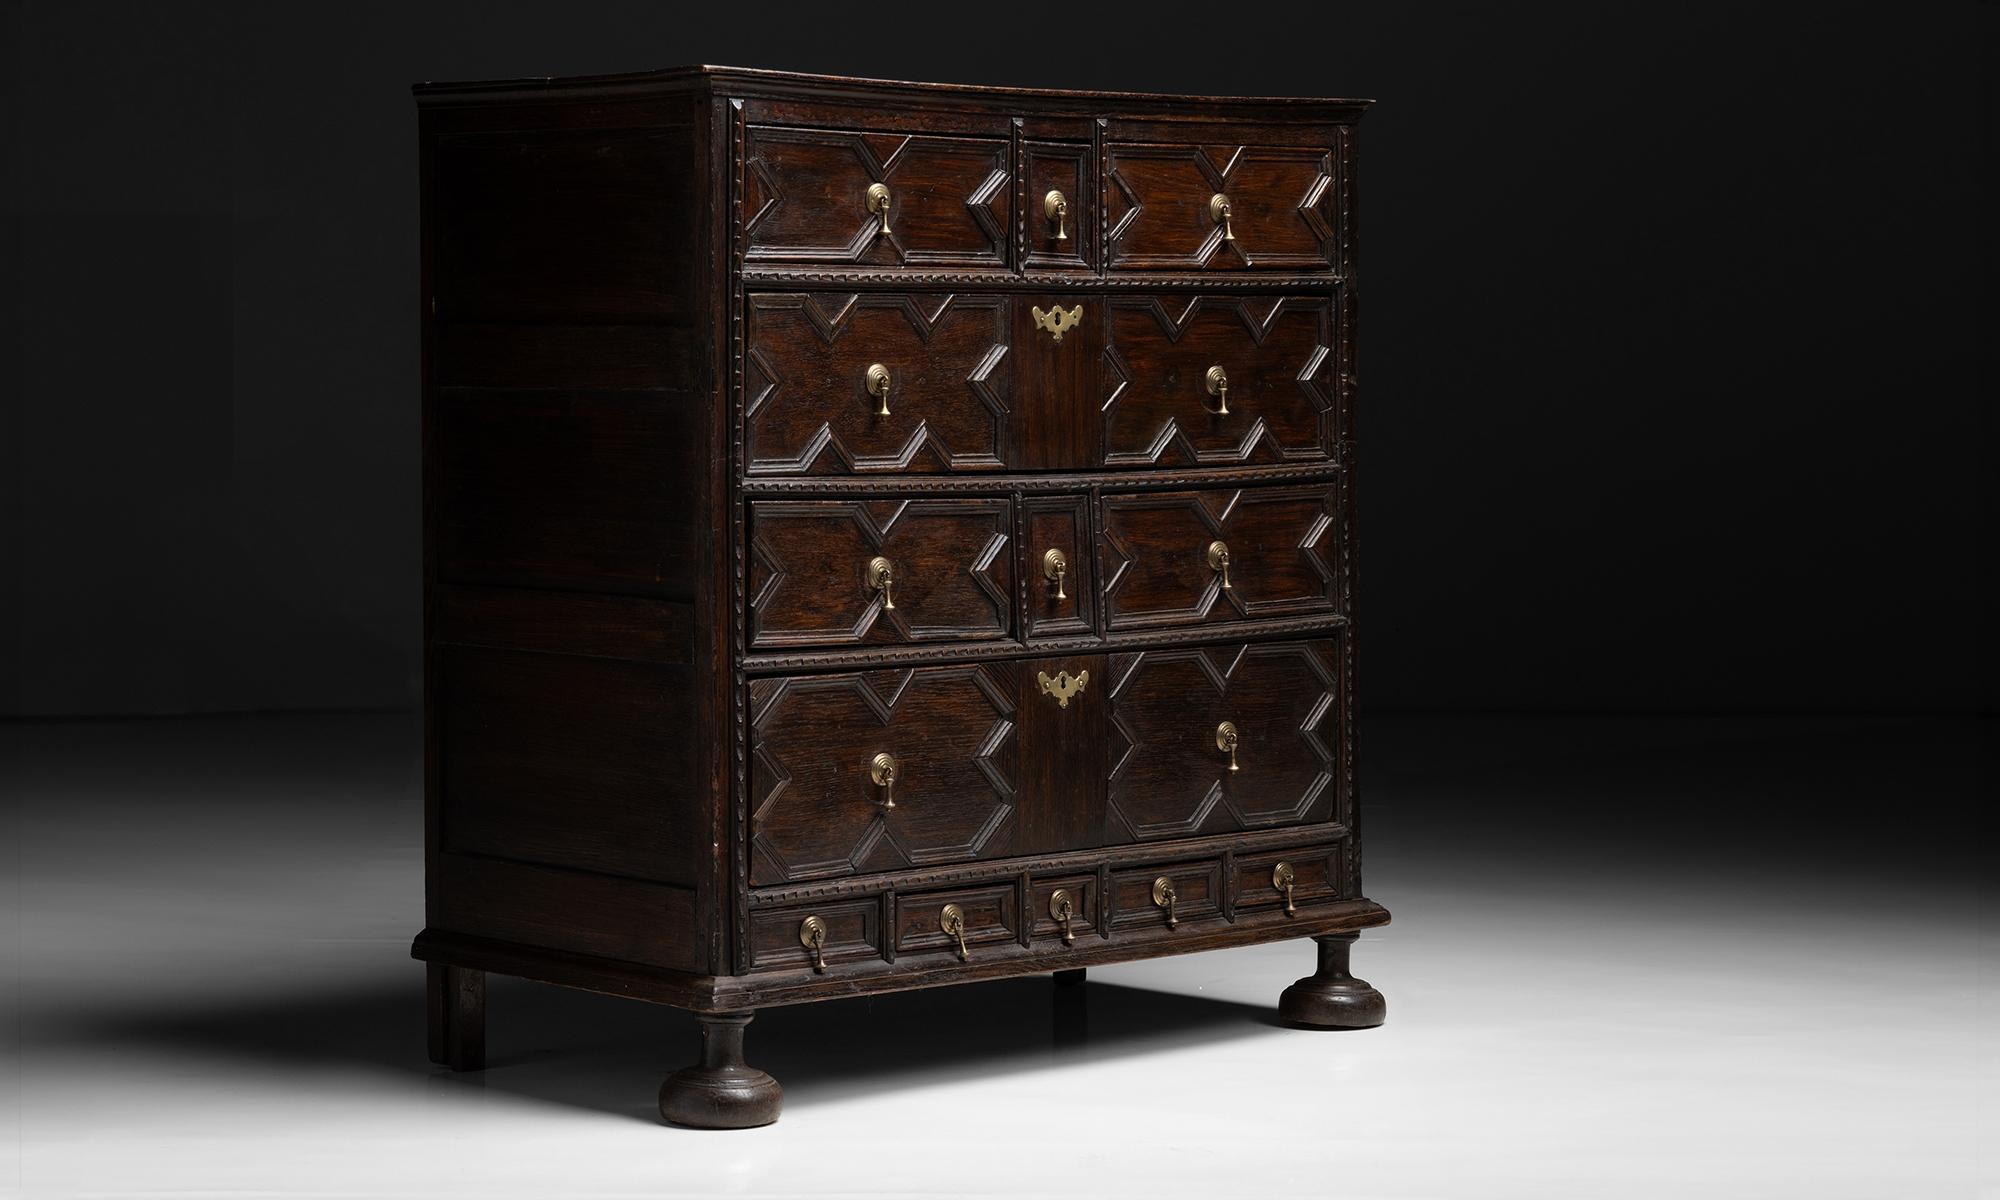 England circa 1790

Ornate molding and carving on drawers, with brass hardware and ball feet.

42.5”w x 22”d x 45”h